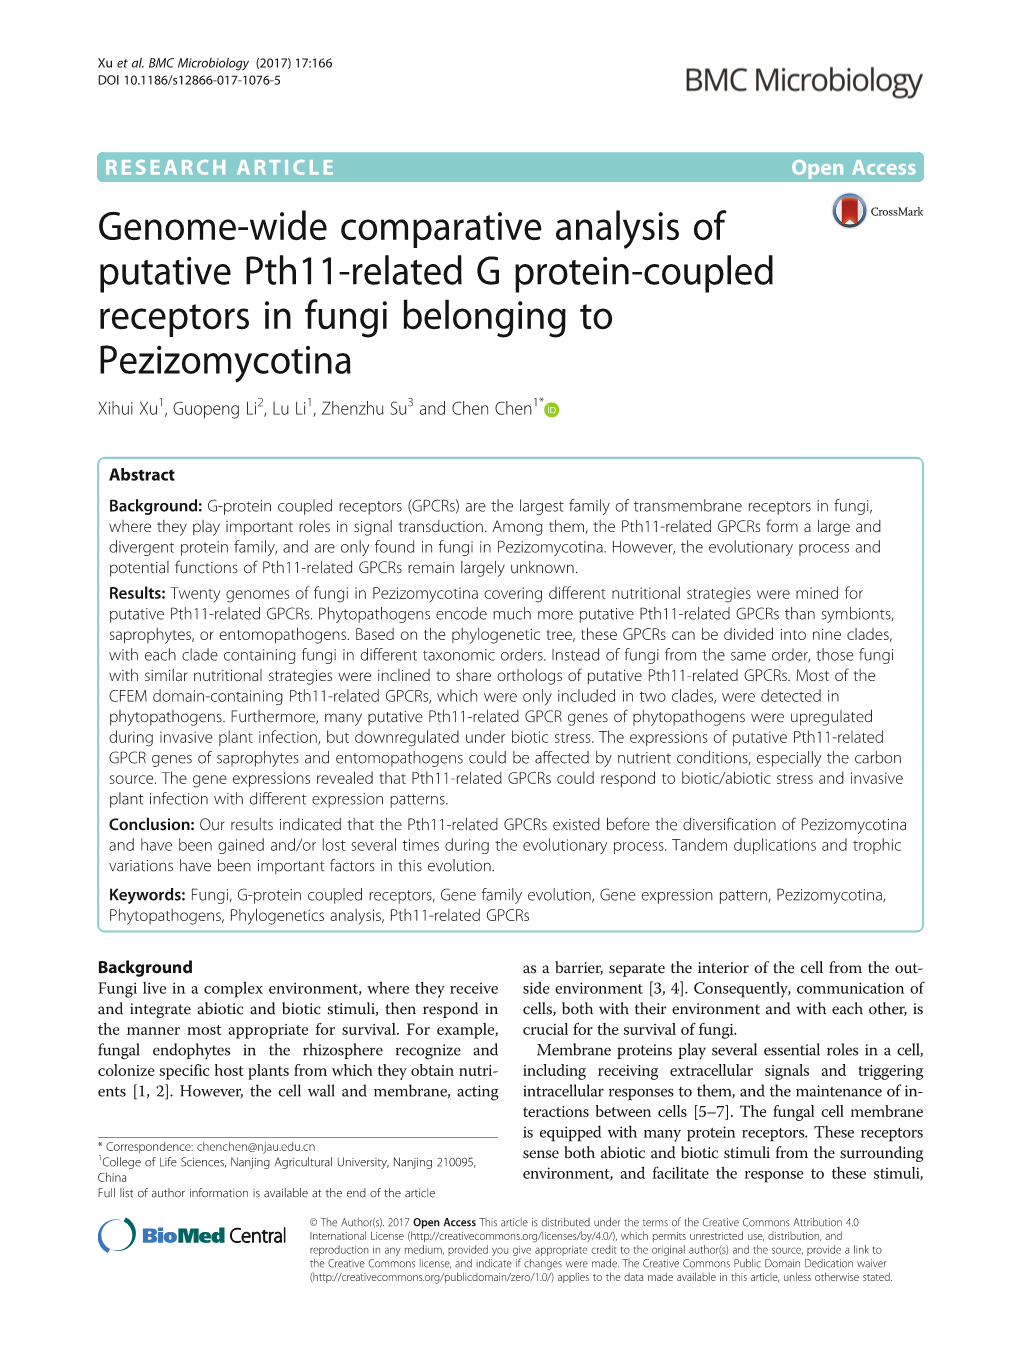 Genome-Wide Comparative Analysis of Putative Pth11-Related G Protein